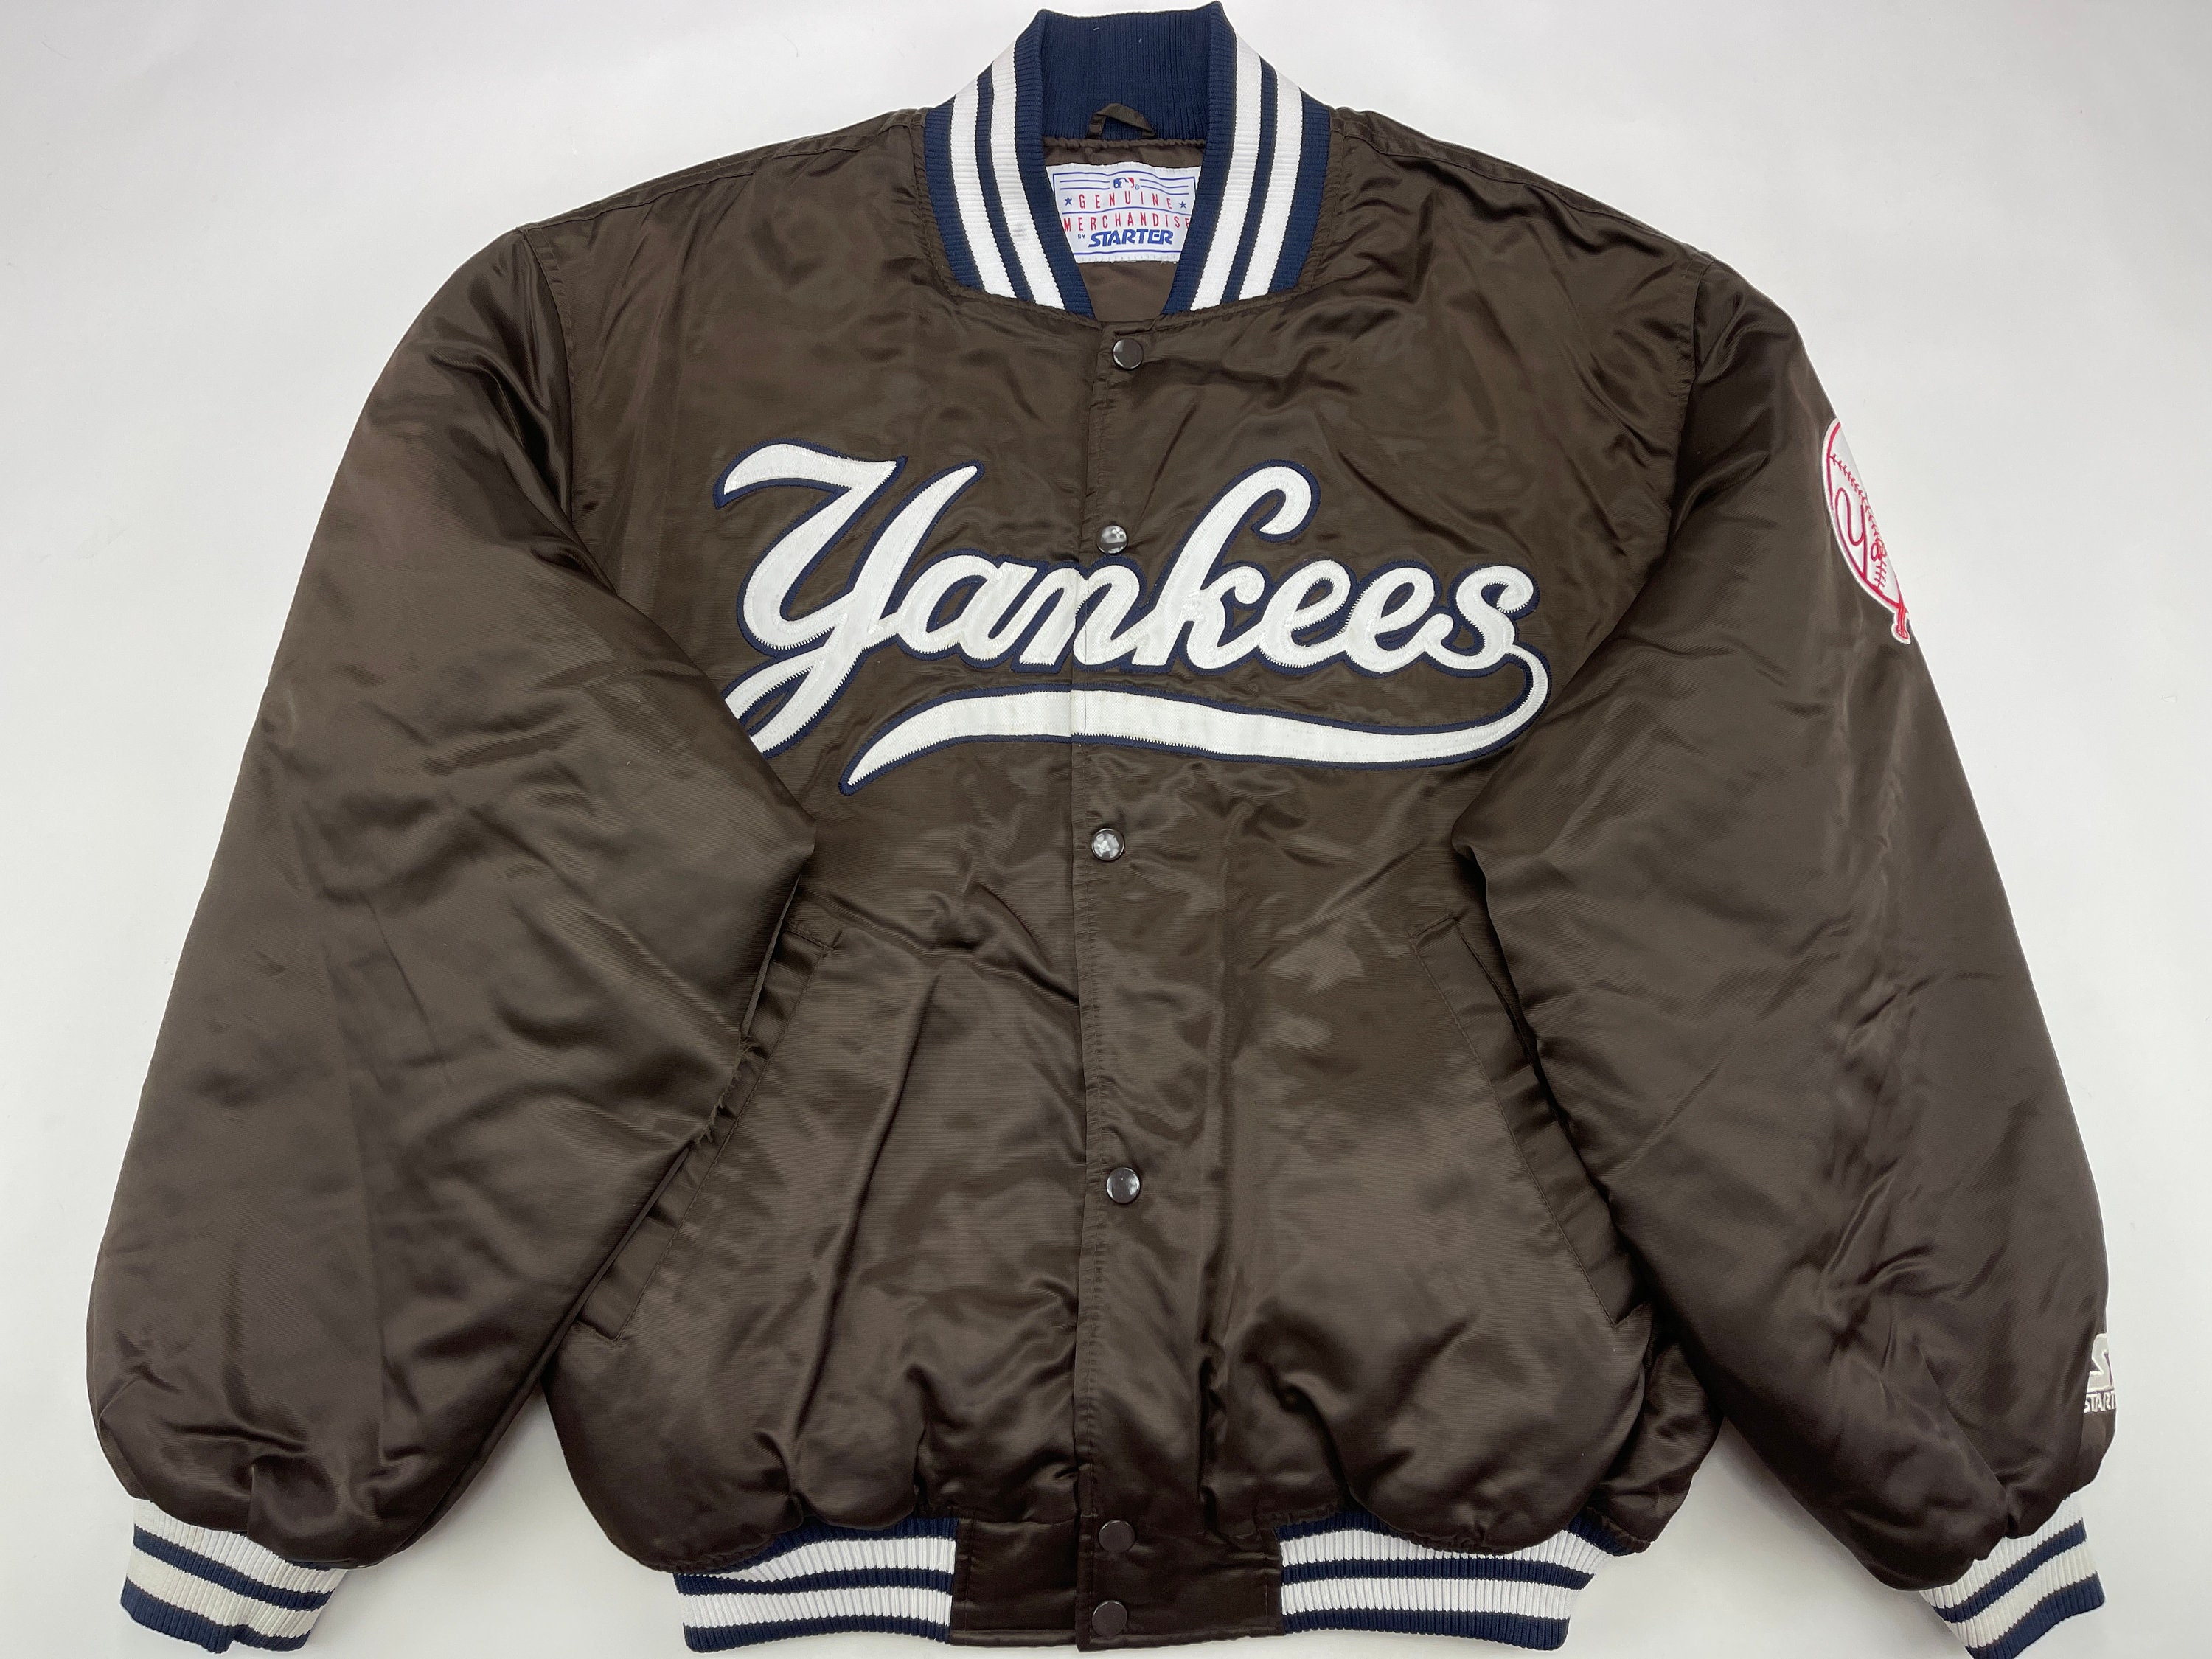 1990s Mlb New York Yankees Puffy Cotton Button Up Starter Jacket